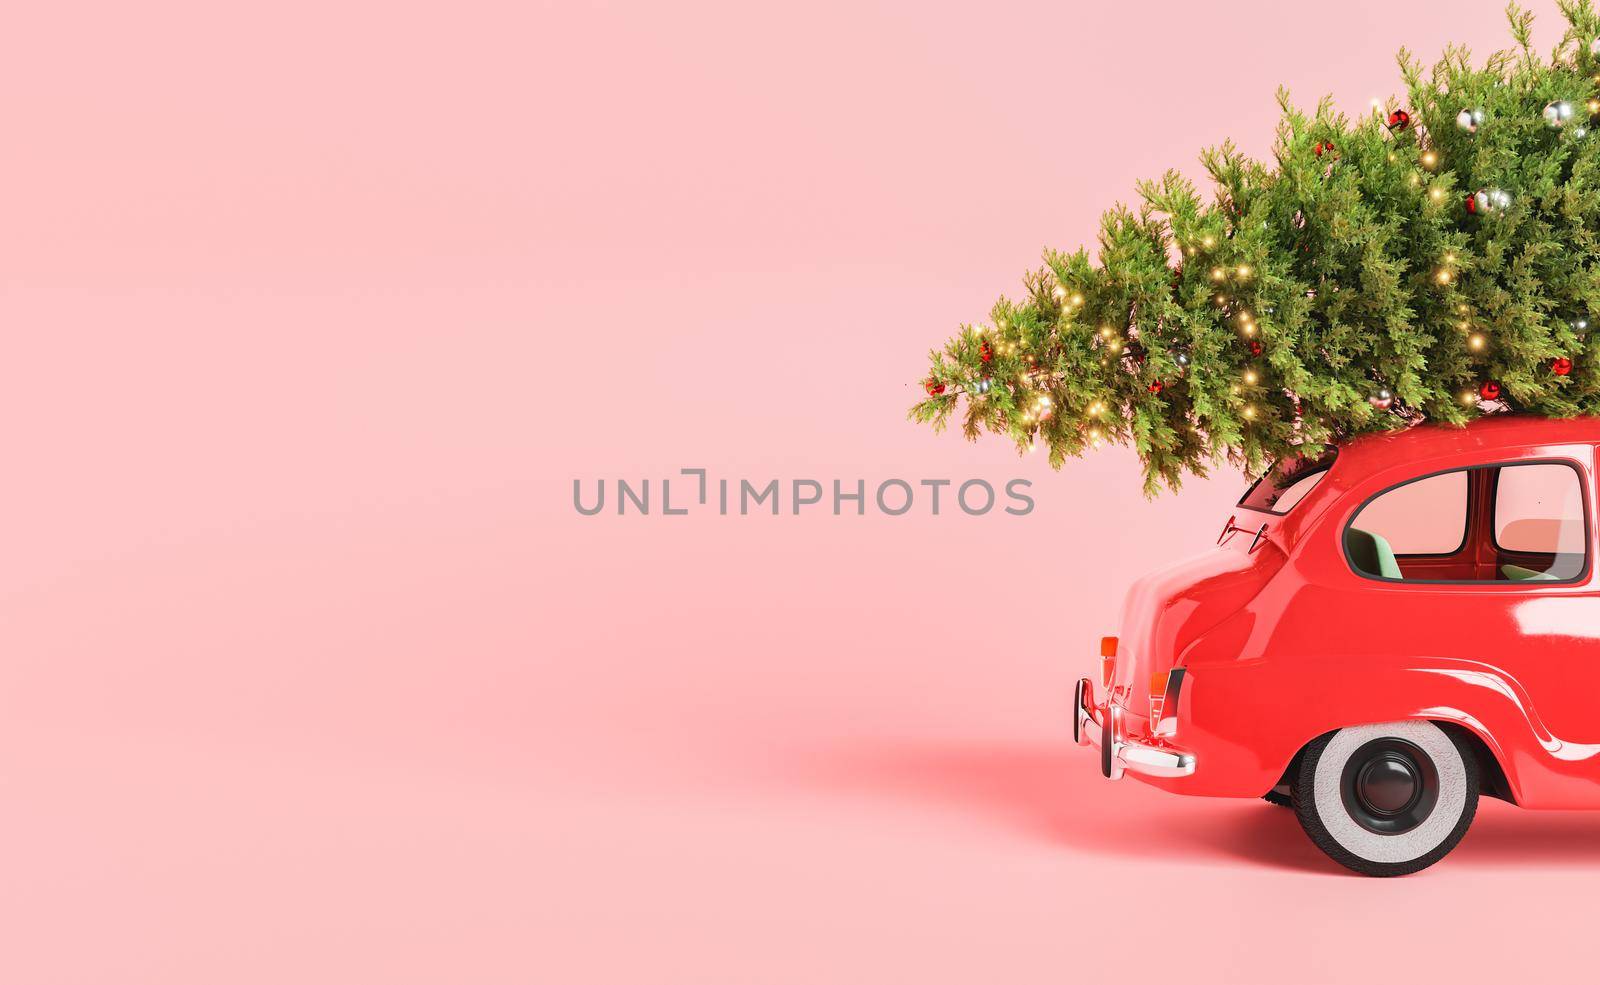 Vintage car with decorated Xmas tree on hood by asolano